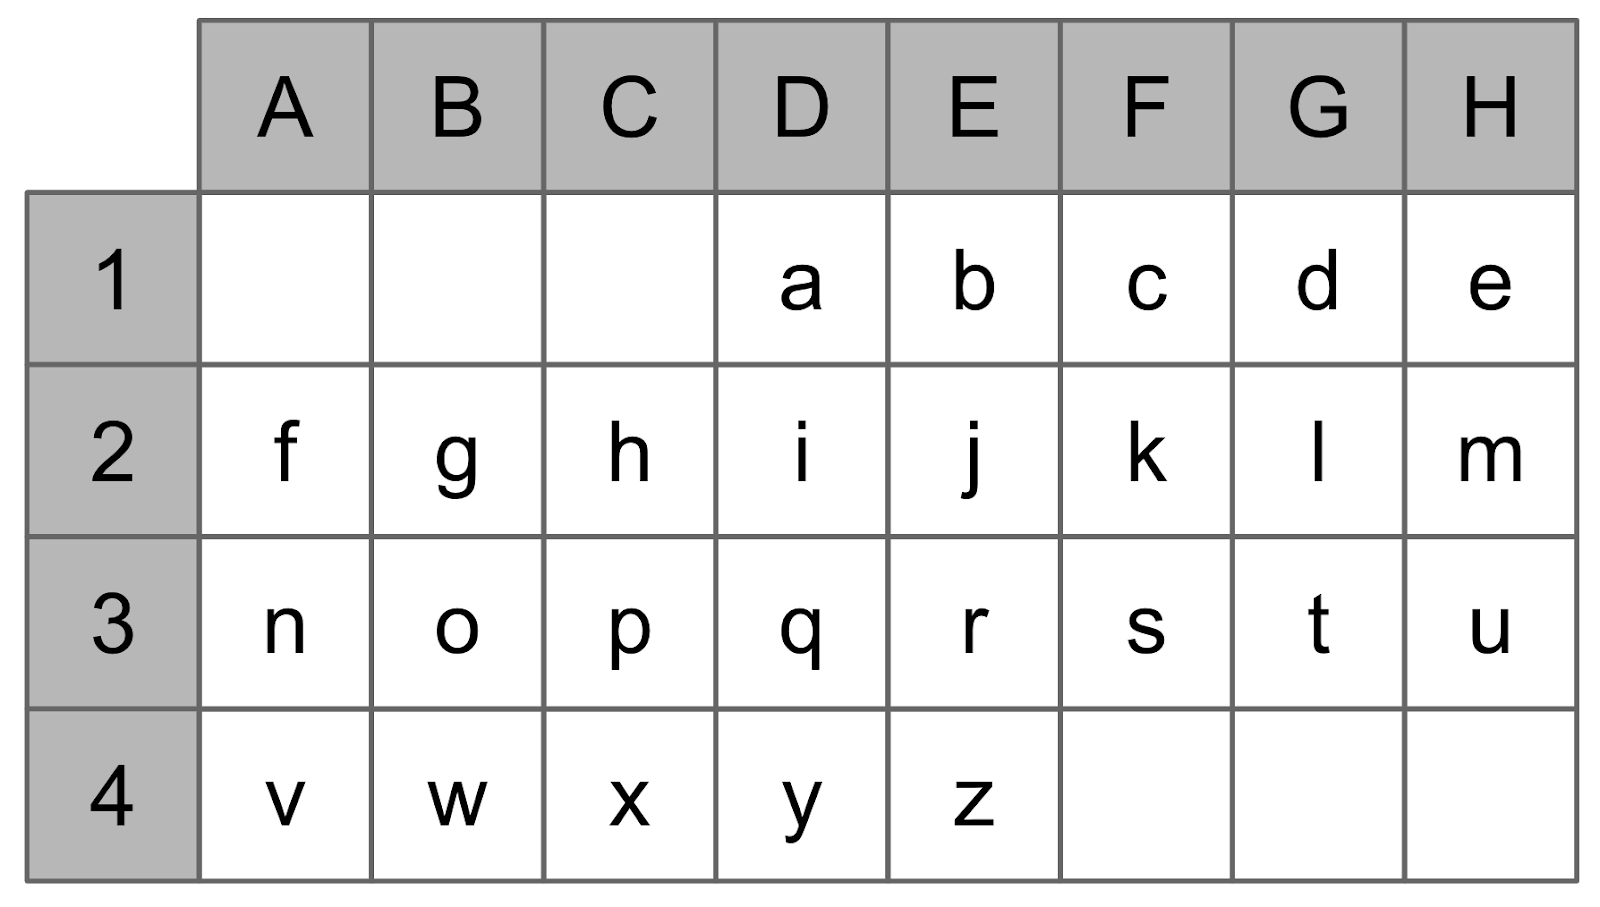 An 8 by 4 grid with letters A-H across the top and numbers 1-4 down the left side. Grid boxes are filled by the alphabet from left to right, with the first three grid boxes left blank.